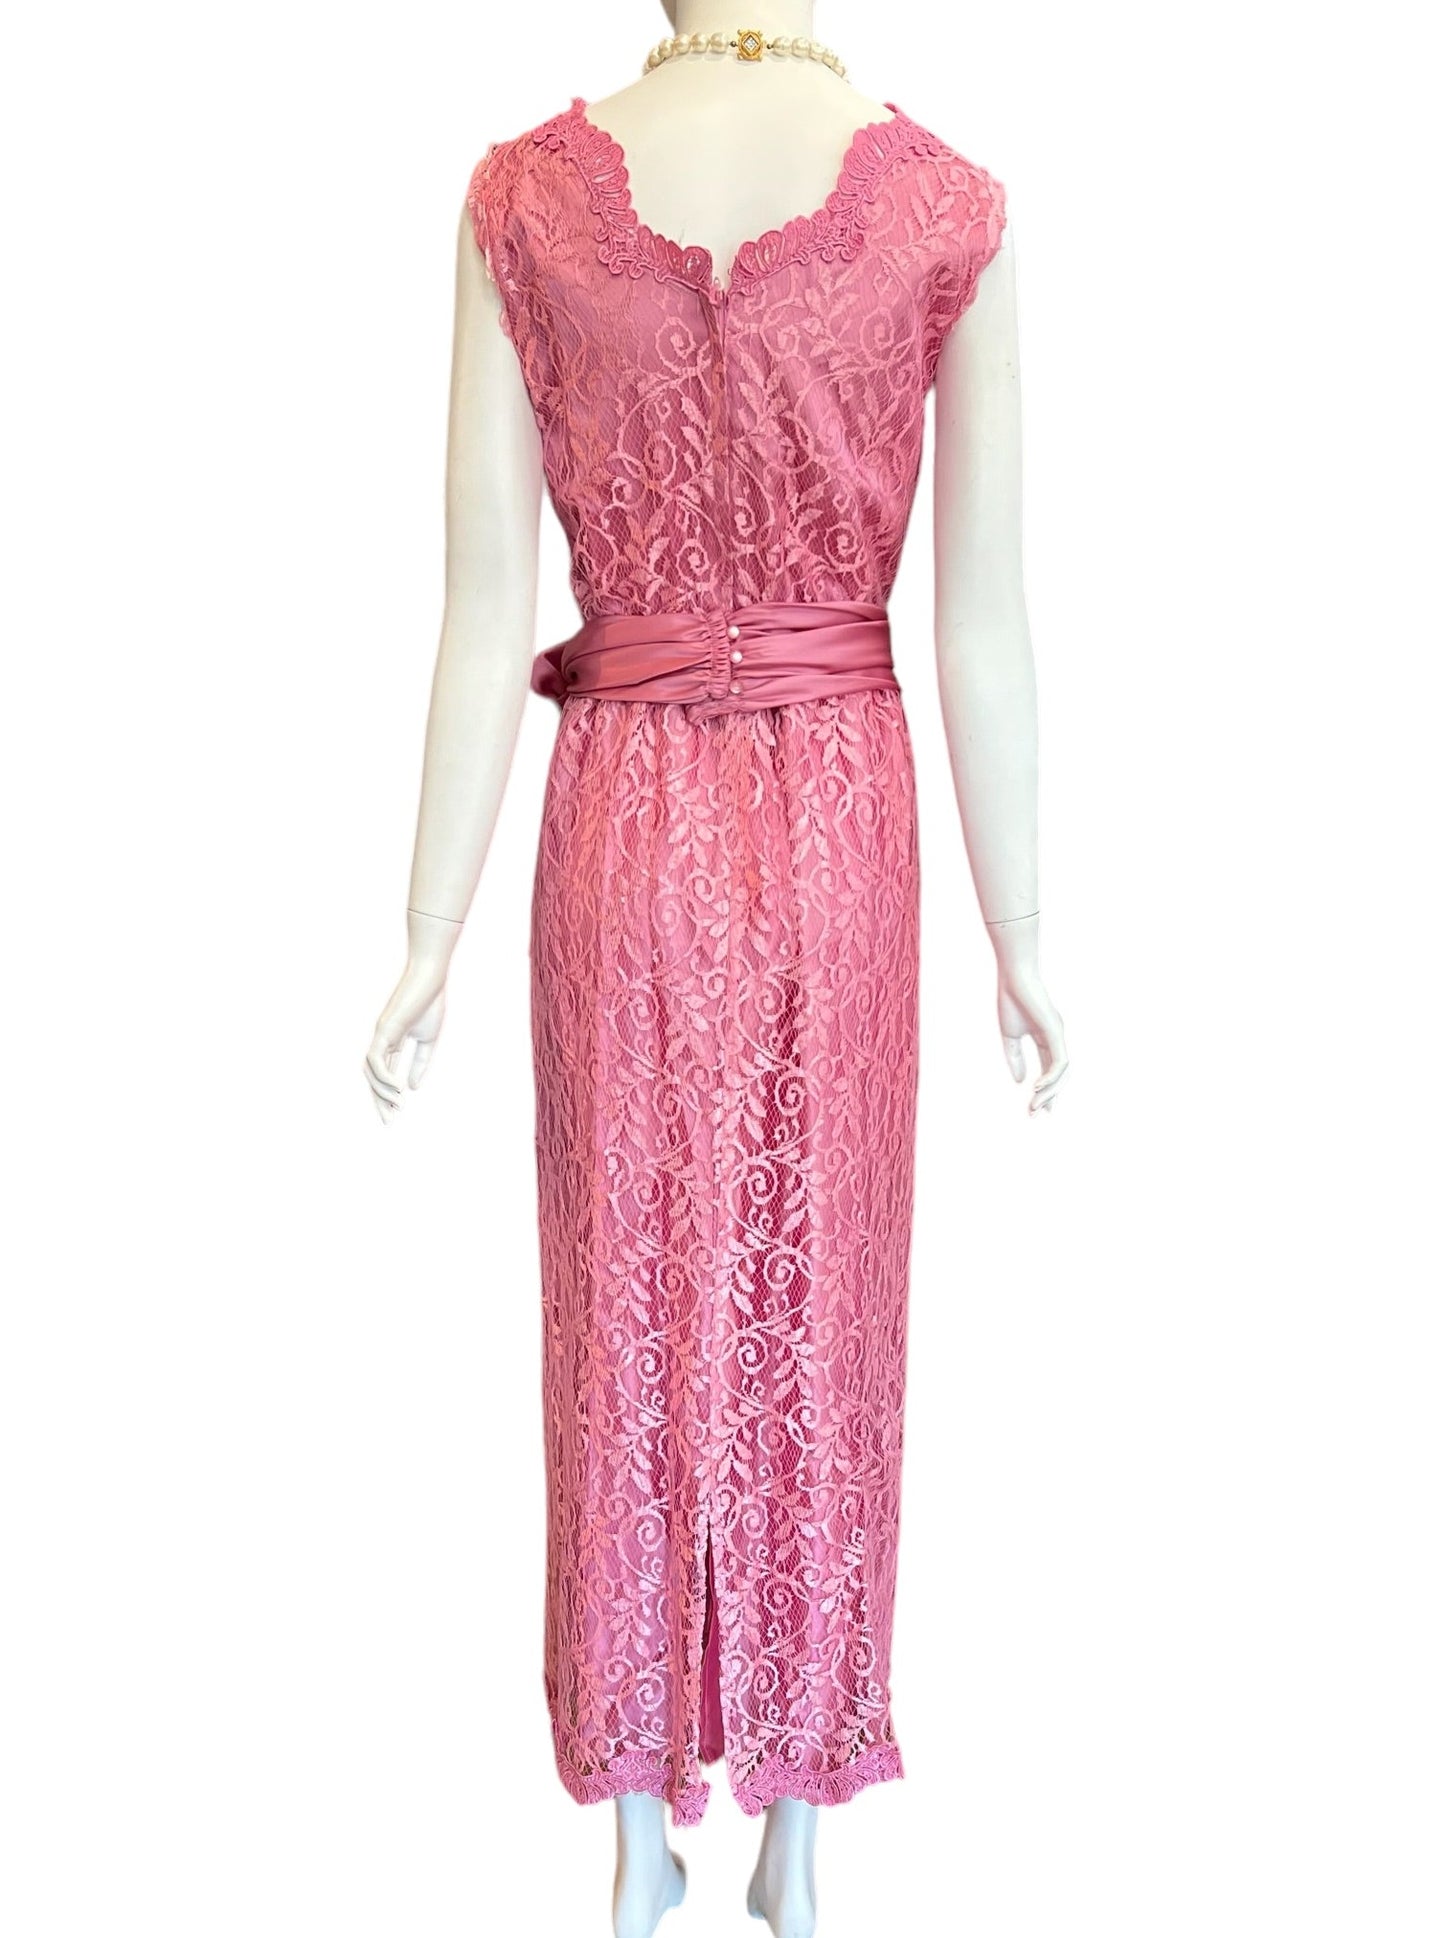 Pretty pink lace vintage party cocktail dress, faux wrap around style with silky sash belt, sleeveless wavy v-neck, long